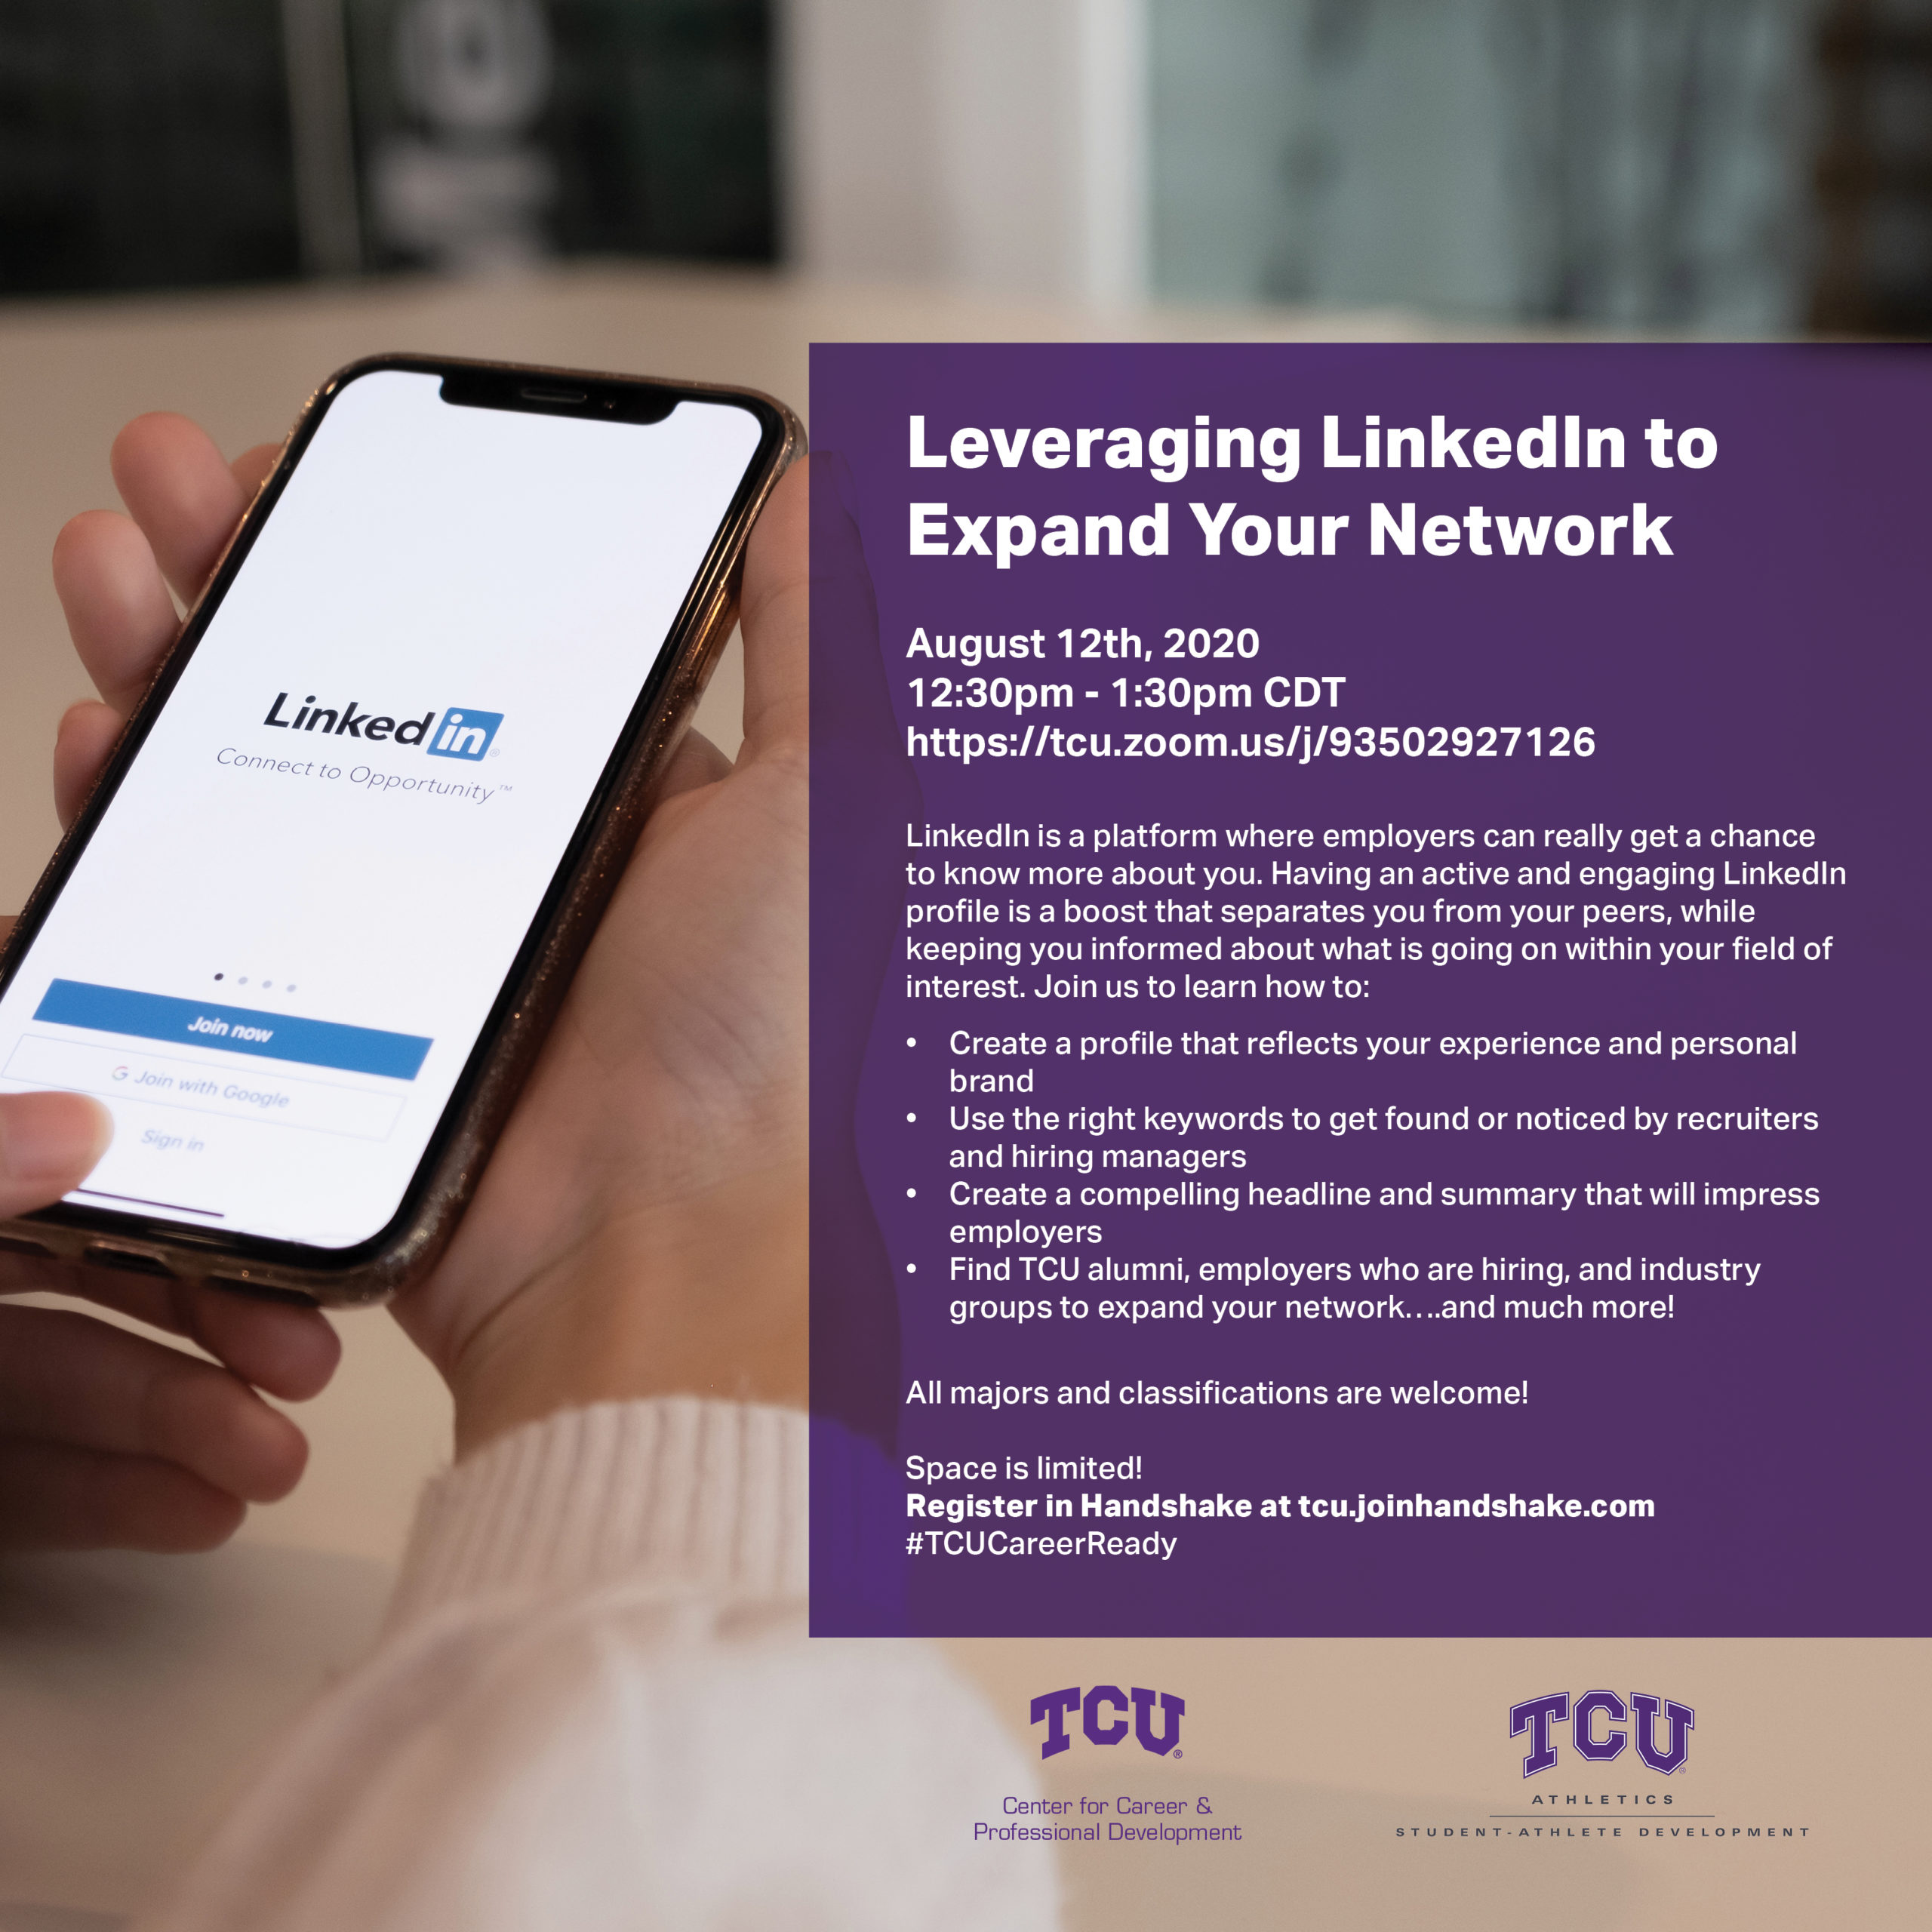 Leveraging LinkedIn to Expand Your Network